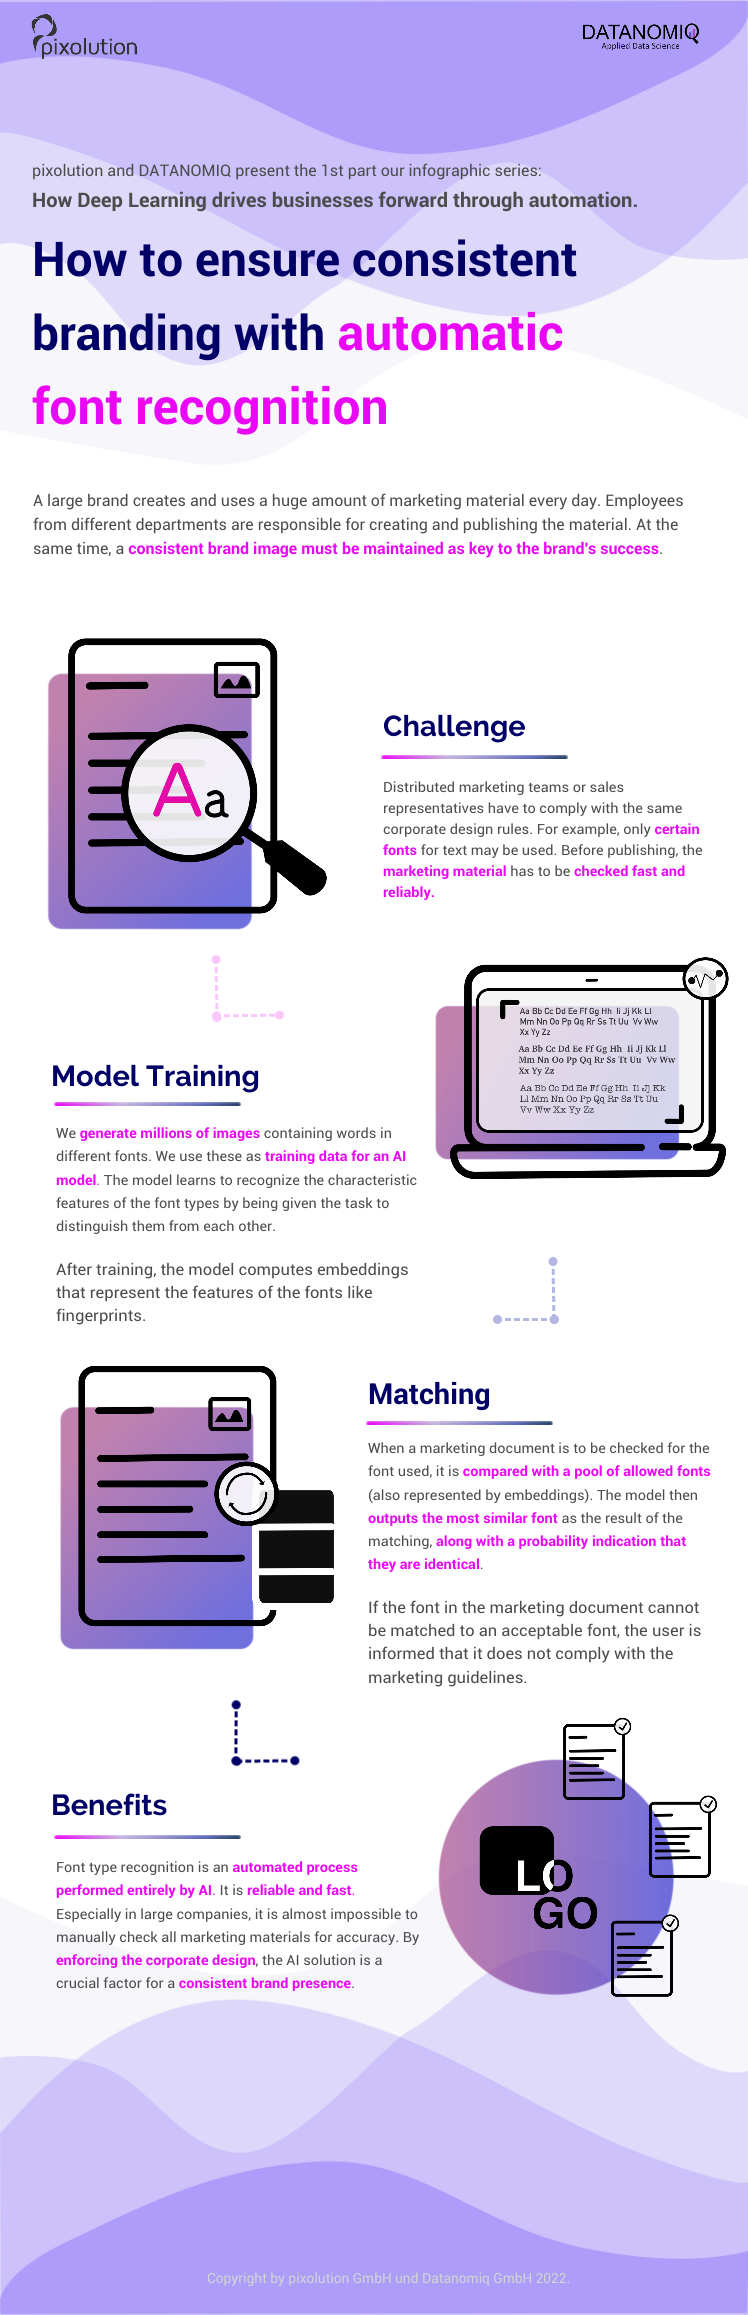 How to ensure consistent branding with automatic font recognition – Infographic